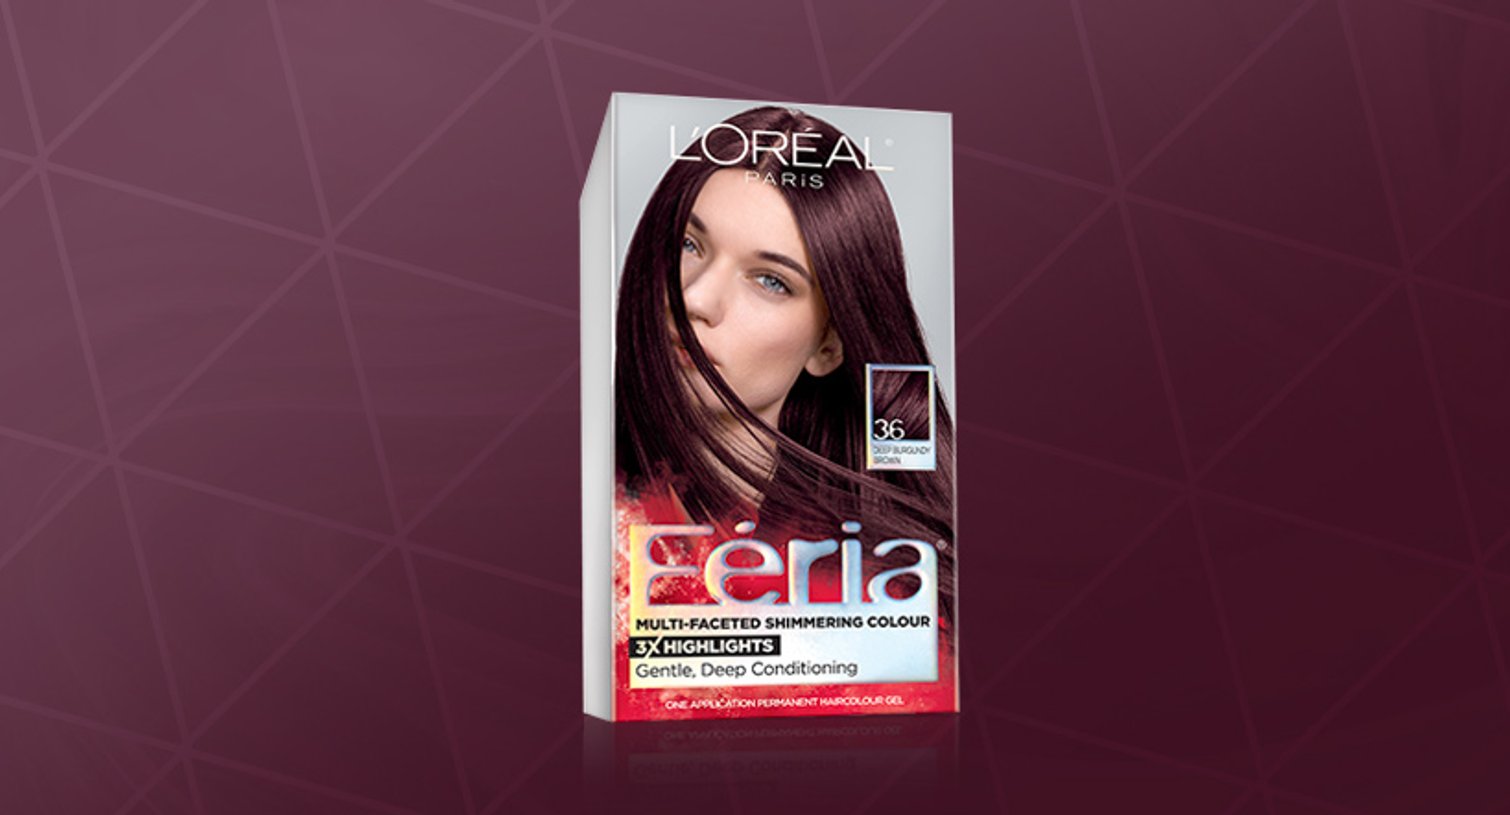 Loreal Paris BMAG Slideshow How To Get A Bold Red Hair Color SLIDE 6